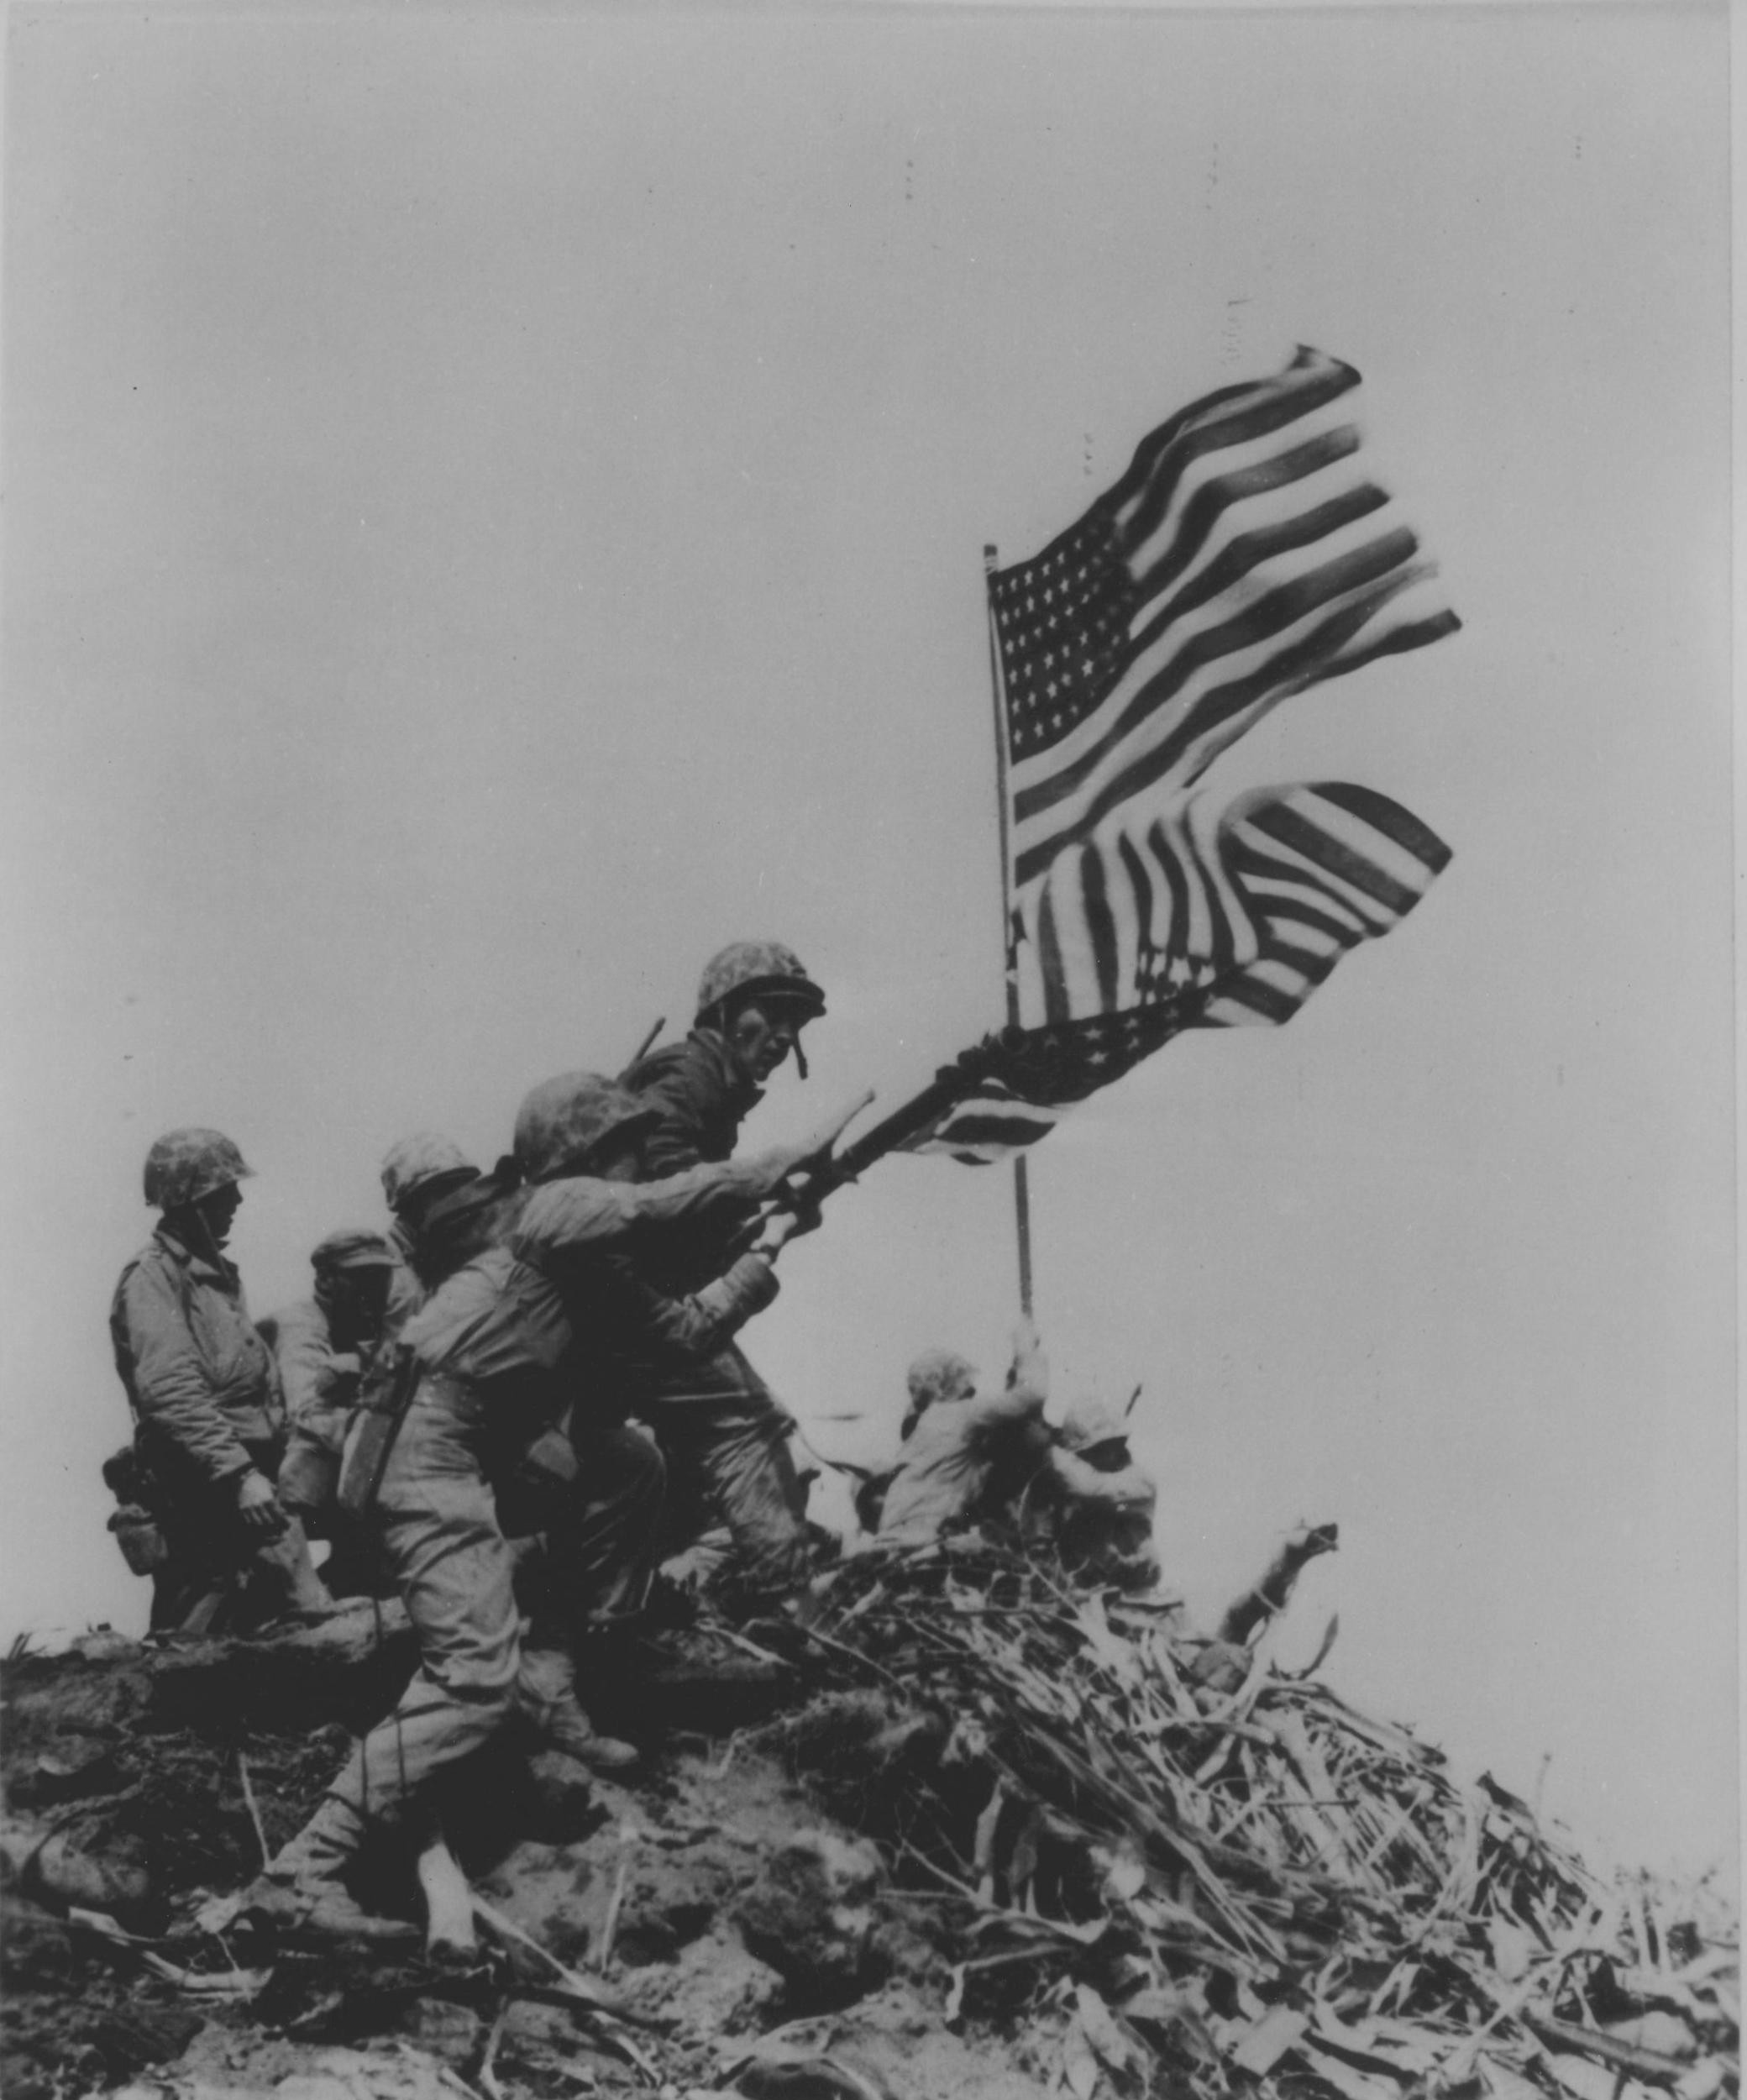 US Marines removing the first Mount Suribachi flag as the second flag was being raised, Iwo Jima, Japan, 23 Feb 1945